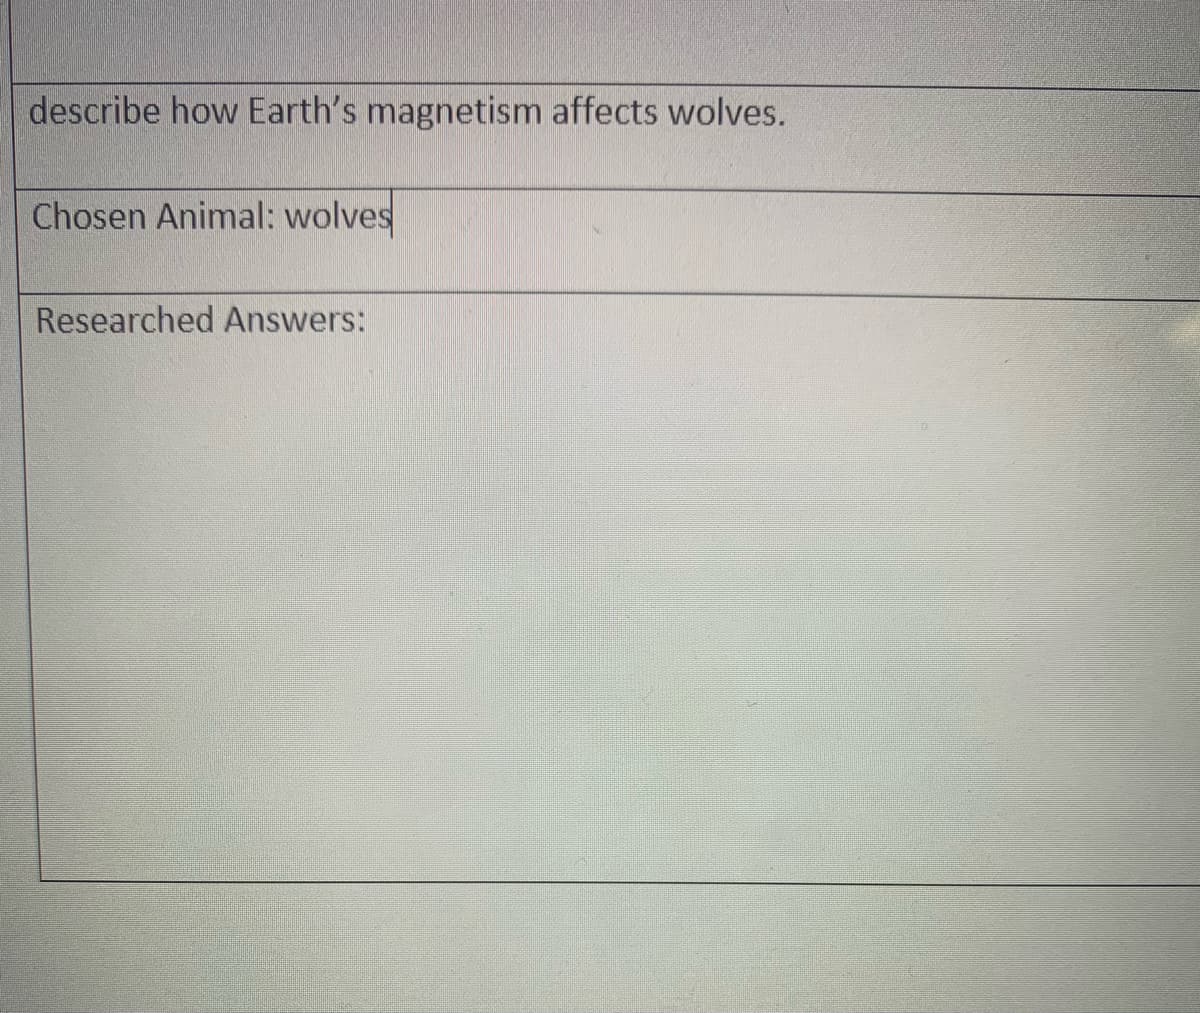 describe how Earth's magnetism affects wolves.
Chosen Animal: wolves
Researched Answers:
